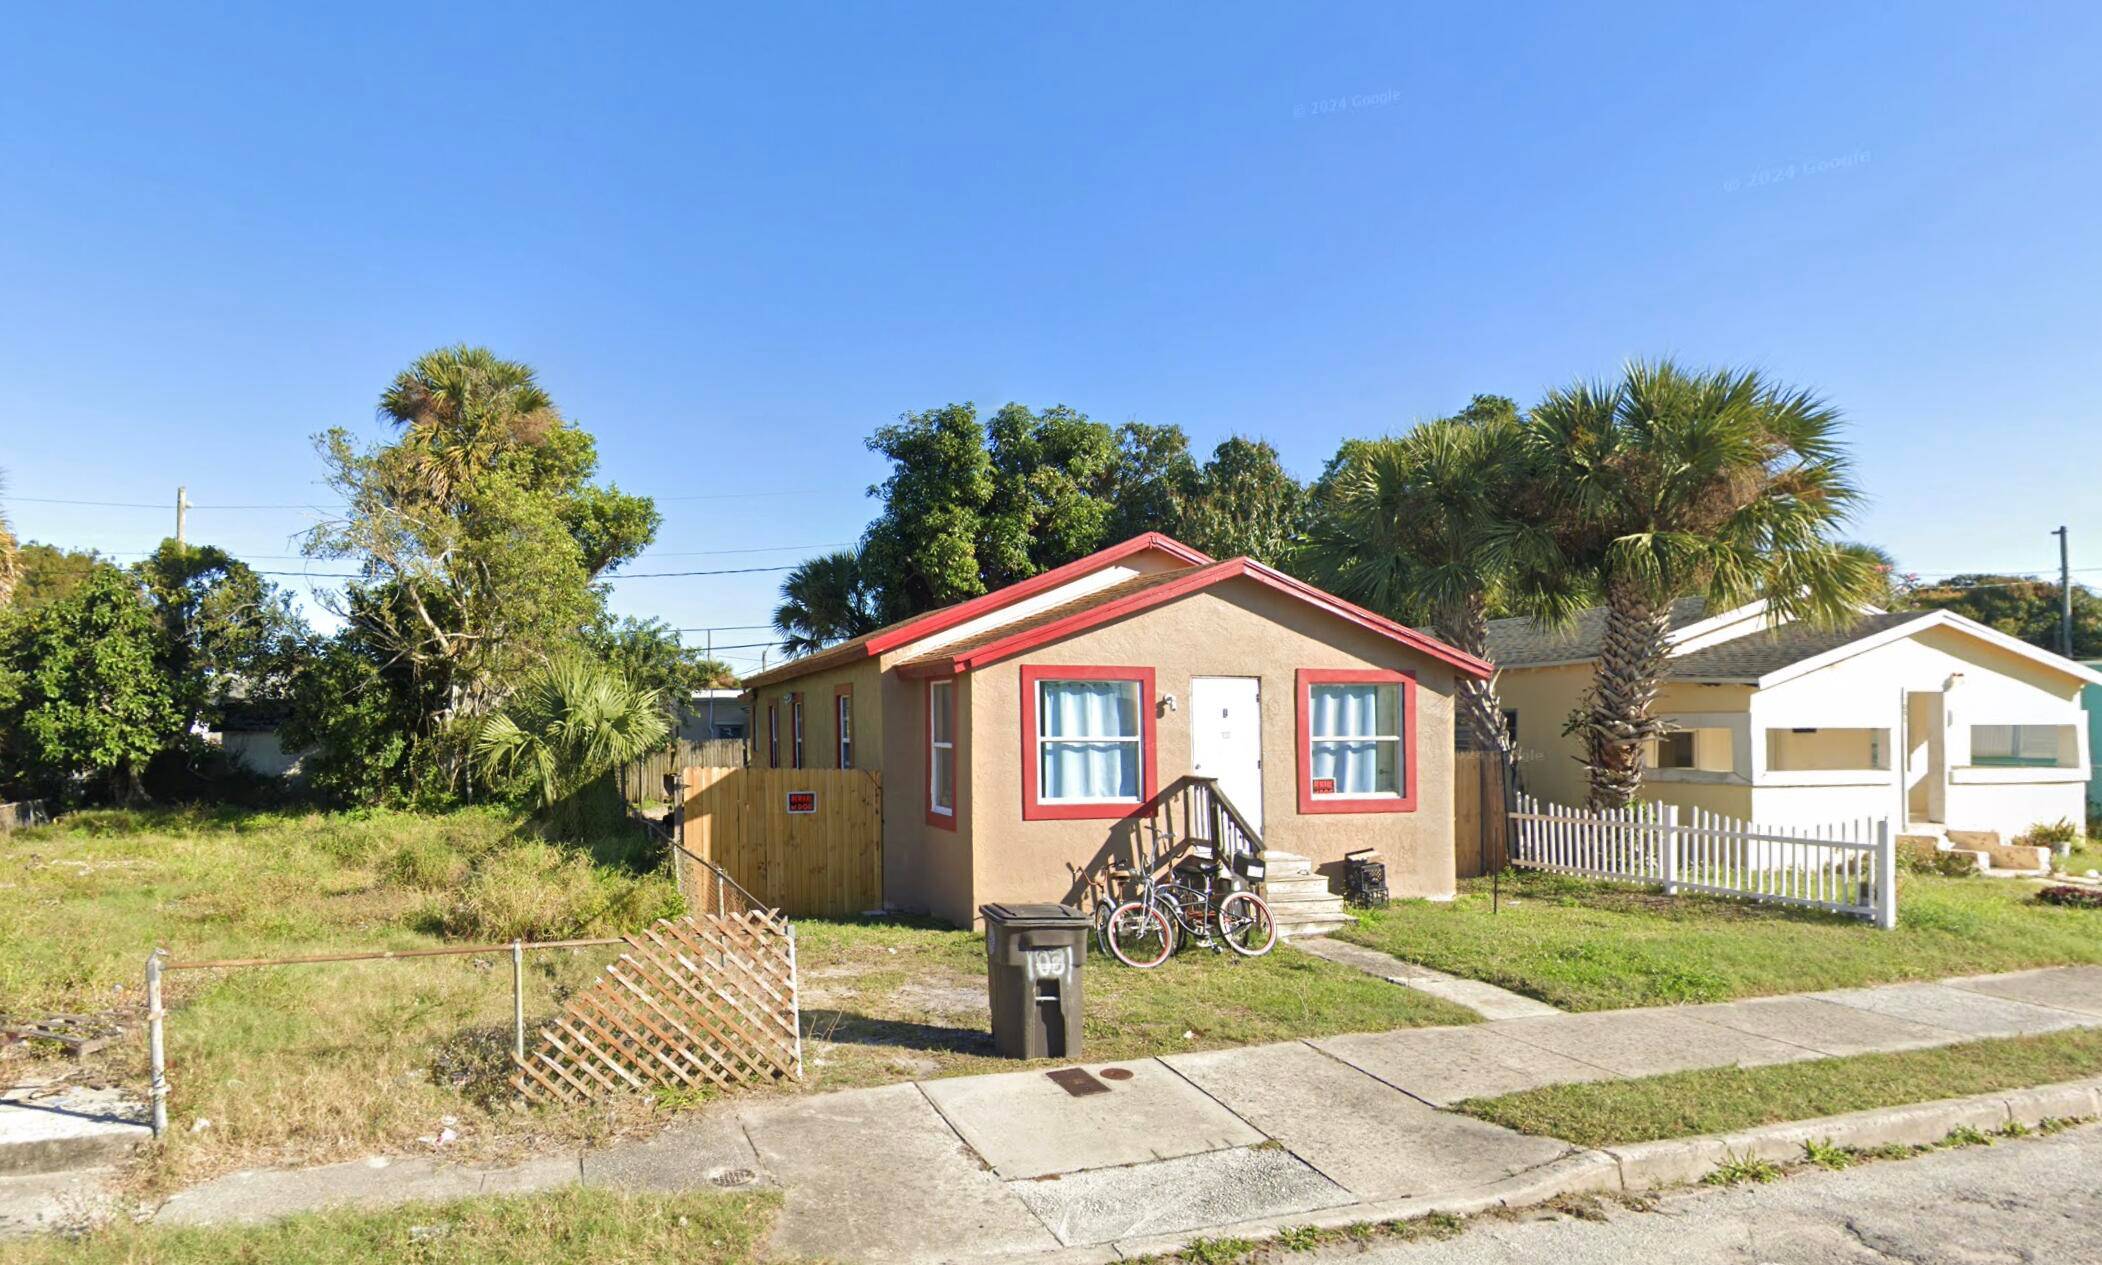 Discover this delightful 2 bedroom, 1 bathroom home, nestled in the heart of West Palm Beach.